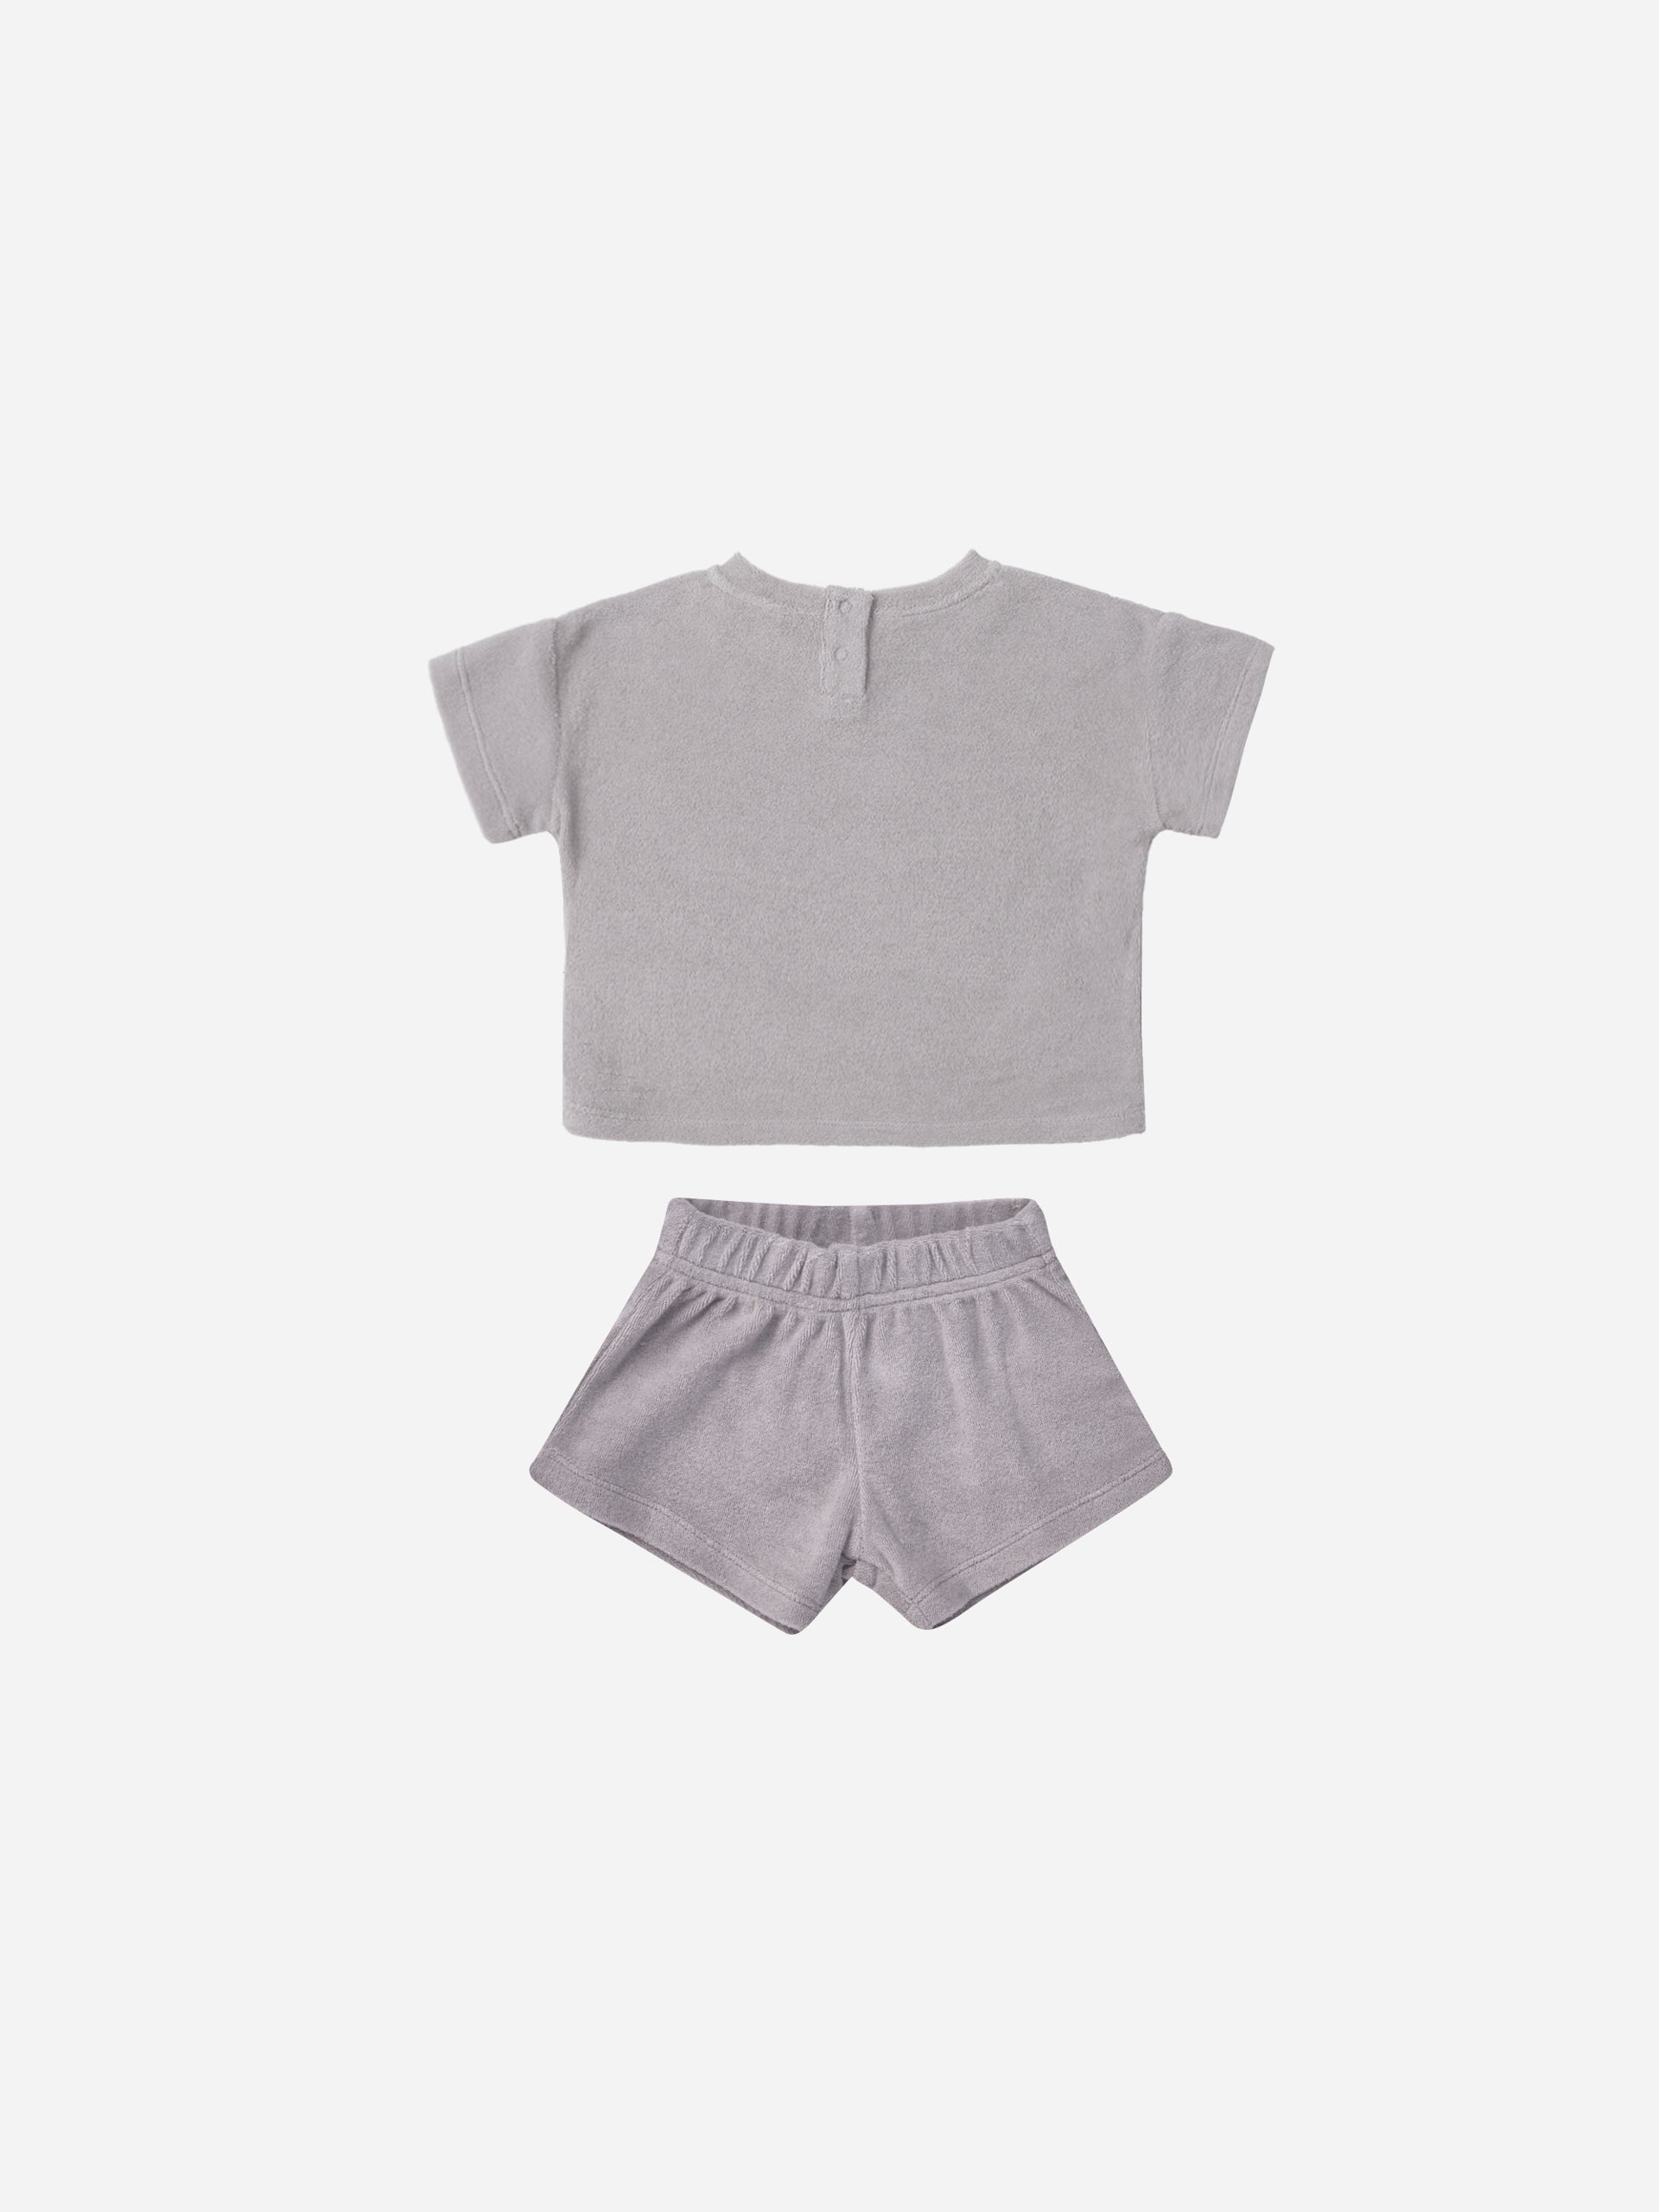 Terry Tee + Shorts Set || Periwinkle - Rylee + Cru | Kids Clothes | Trendy Baby Clothes | Modern Infant Outfits |